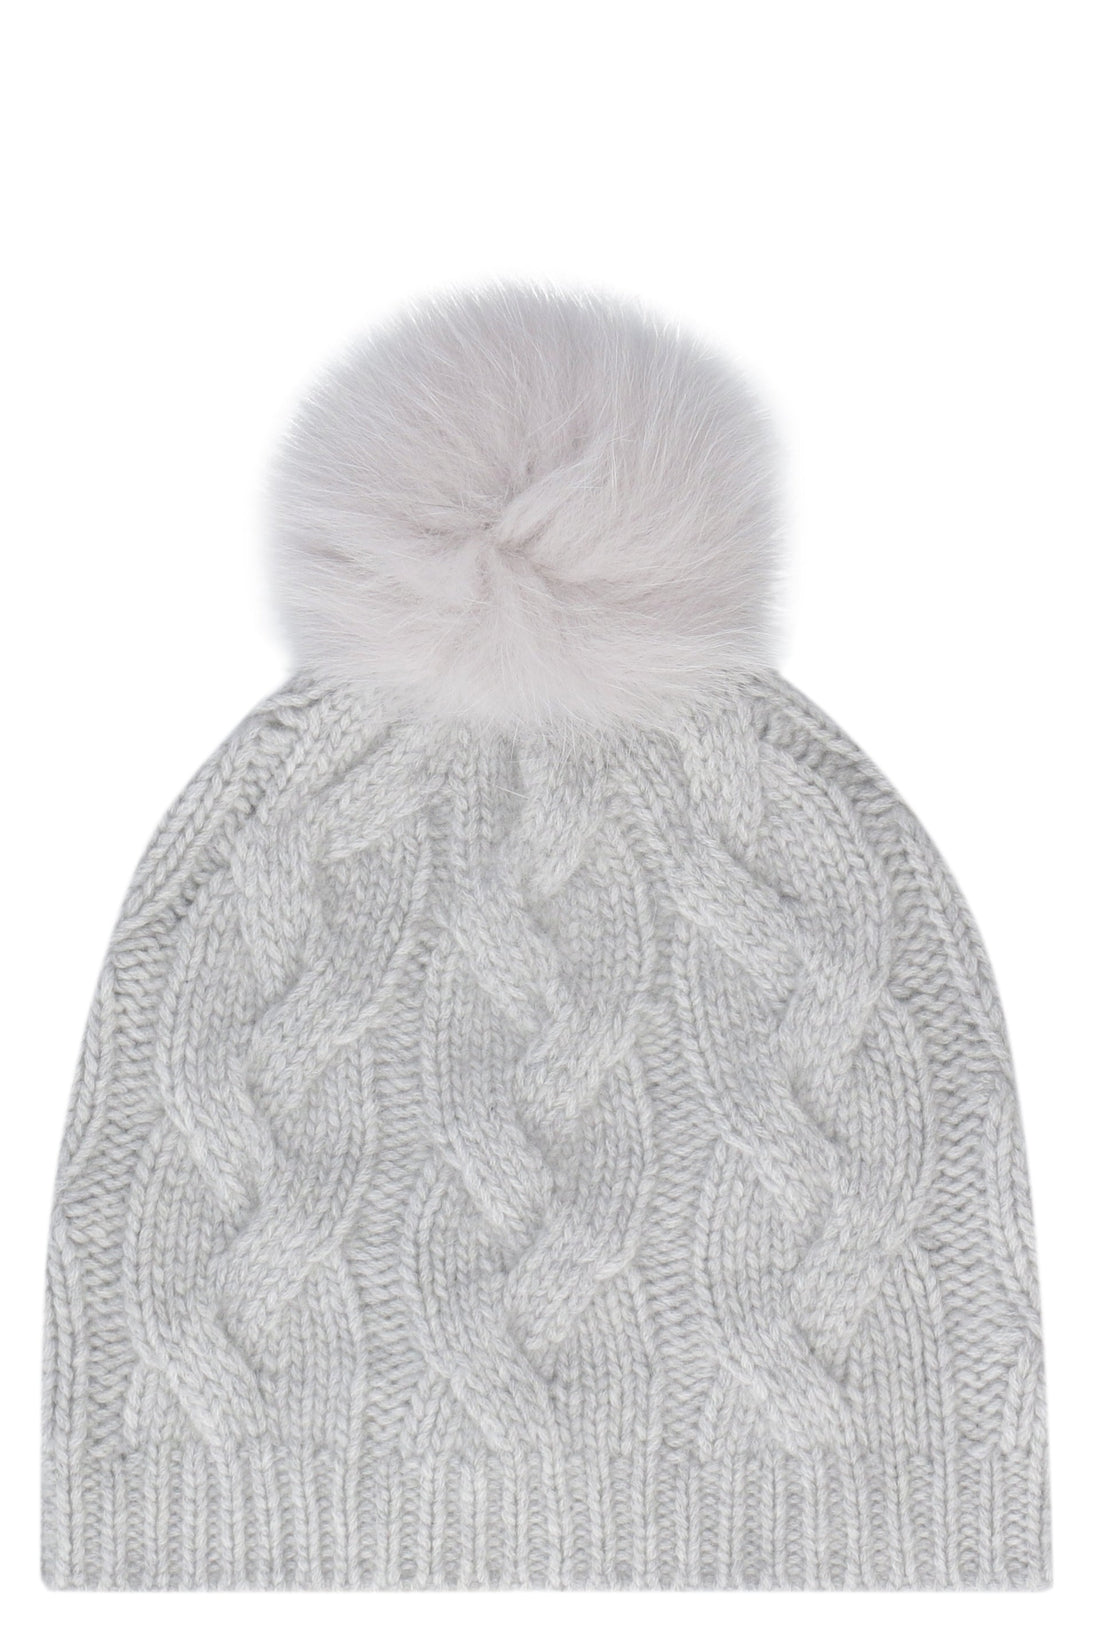 Max Mara-OUTLET-SALE-Knitted wool beanie with pom-pom-ARCHIVIST